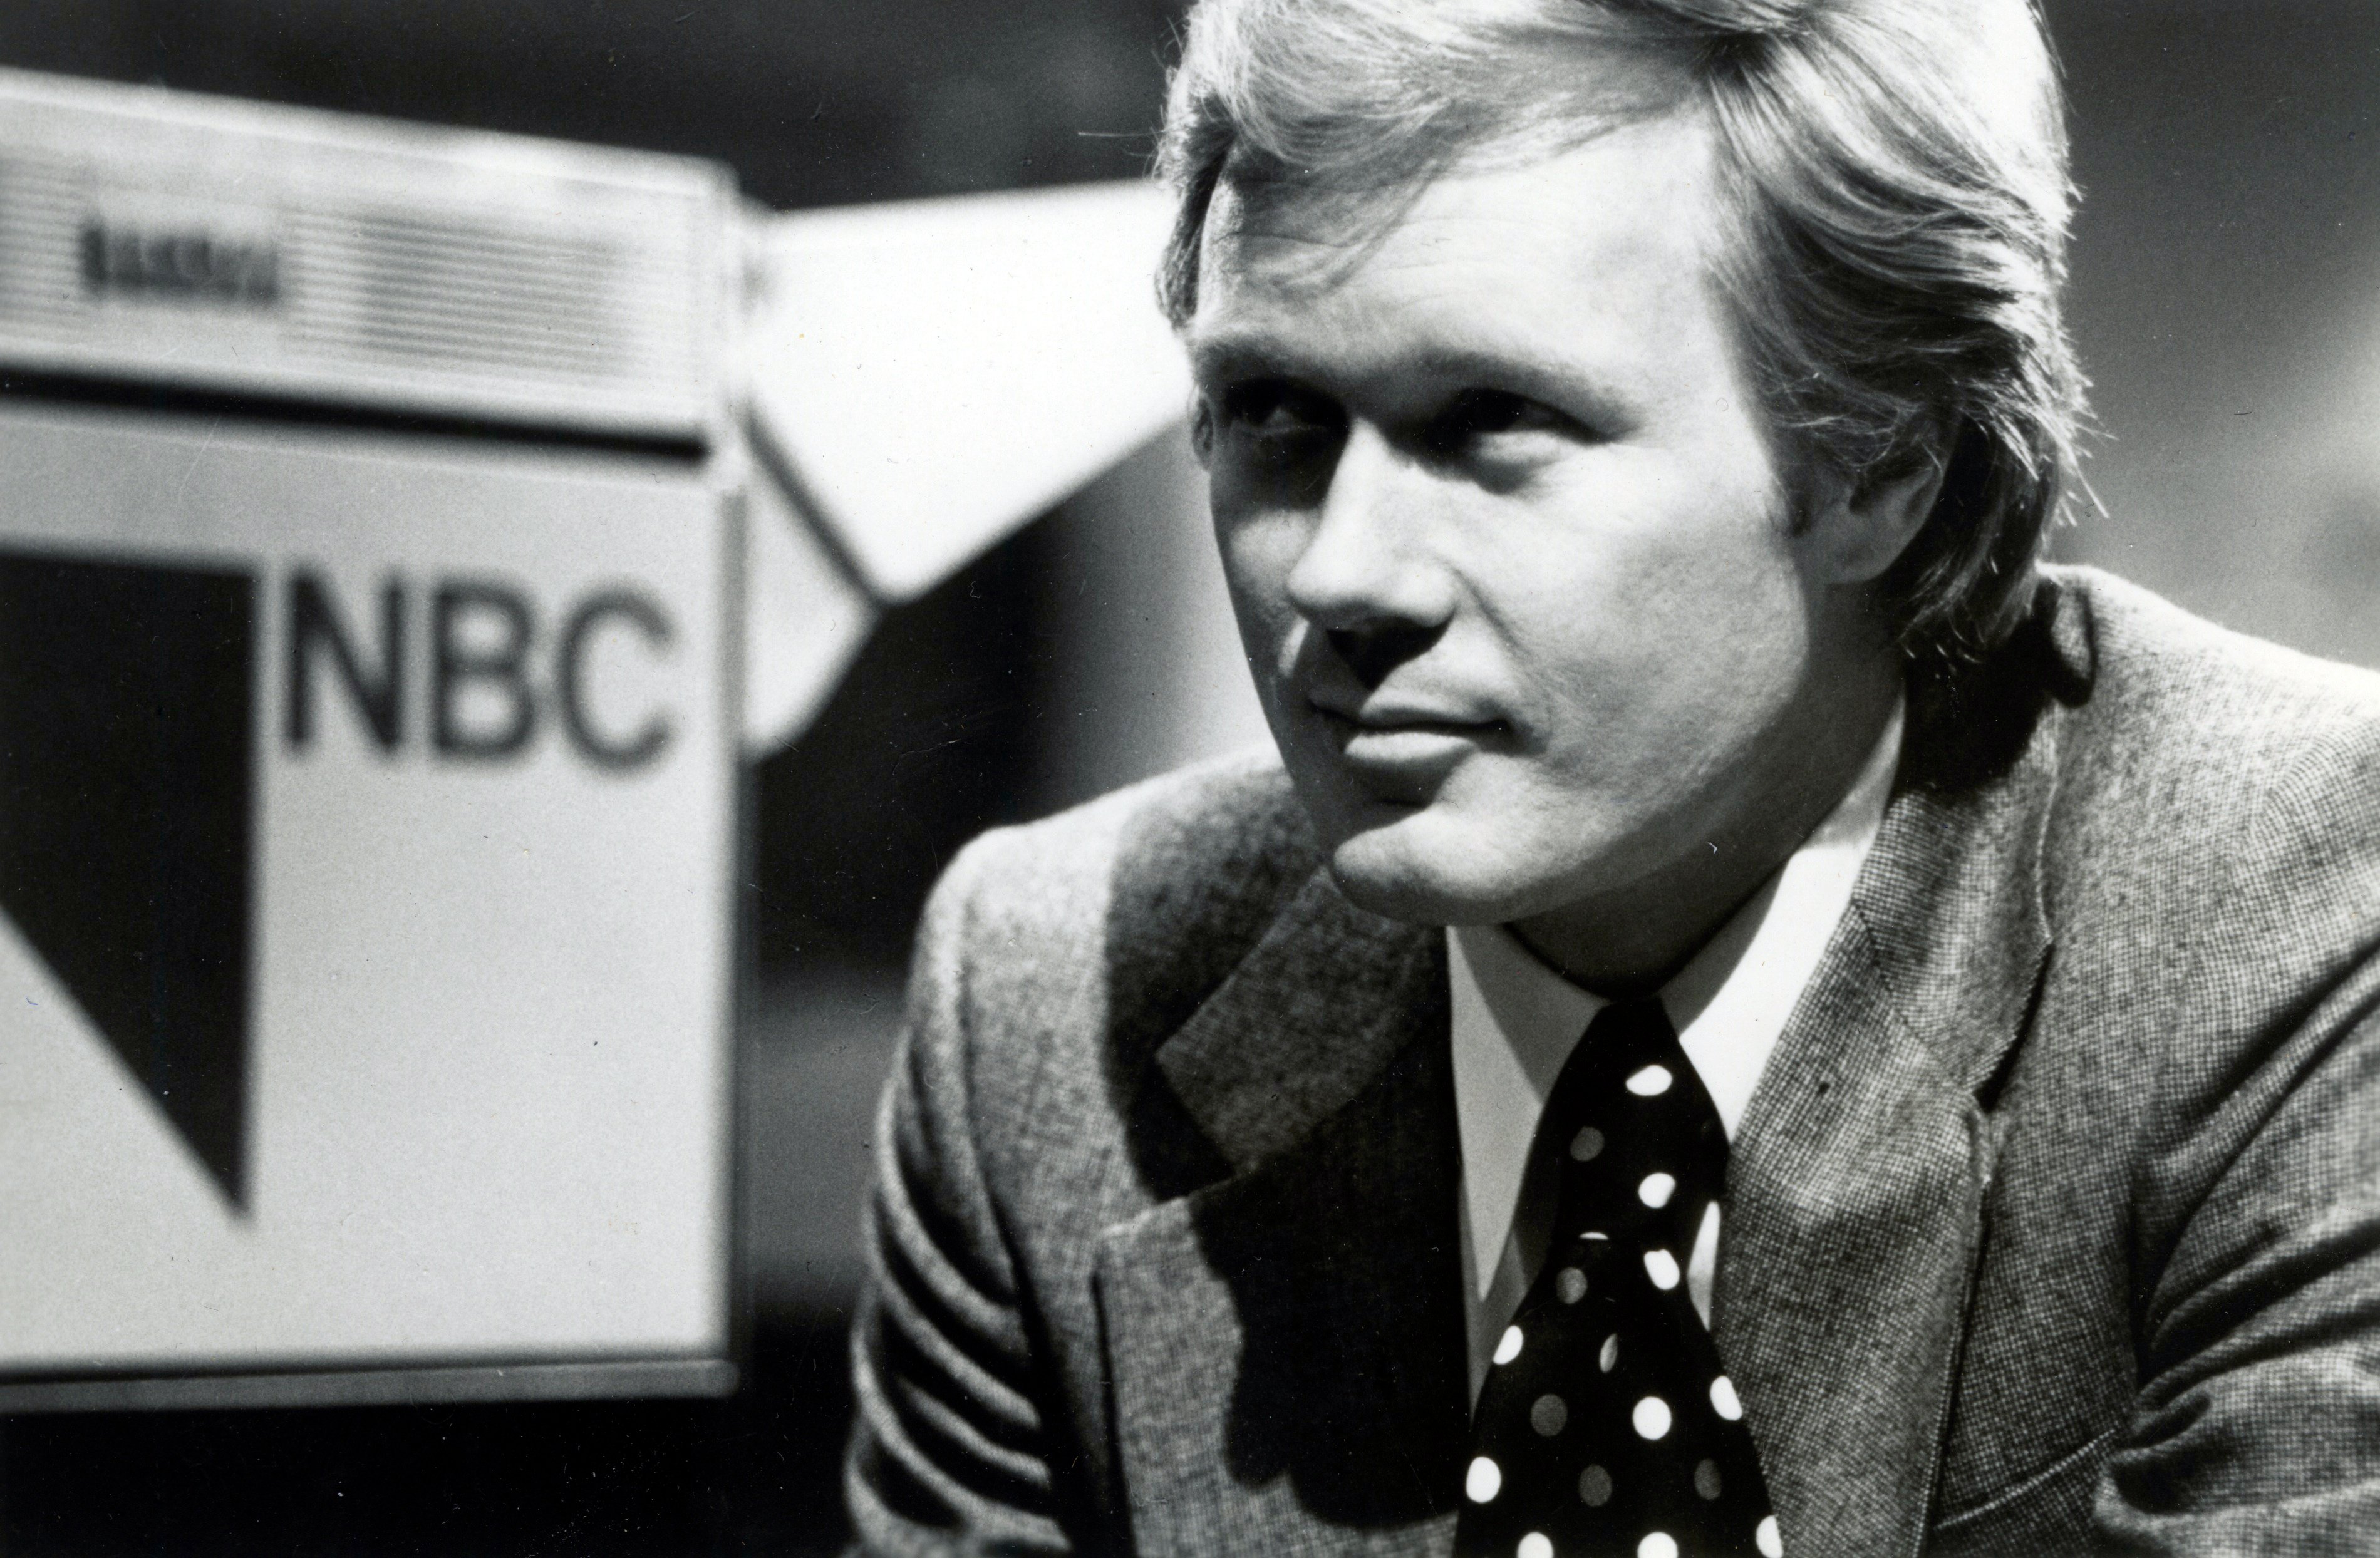 Scarborough in his early New York City days at WNBC, 1978.